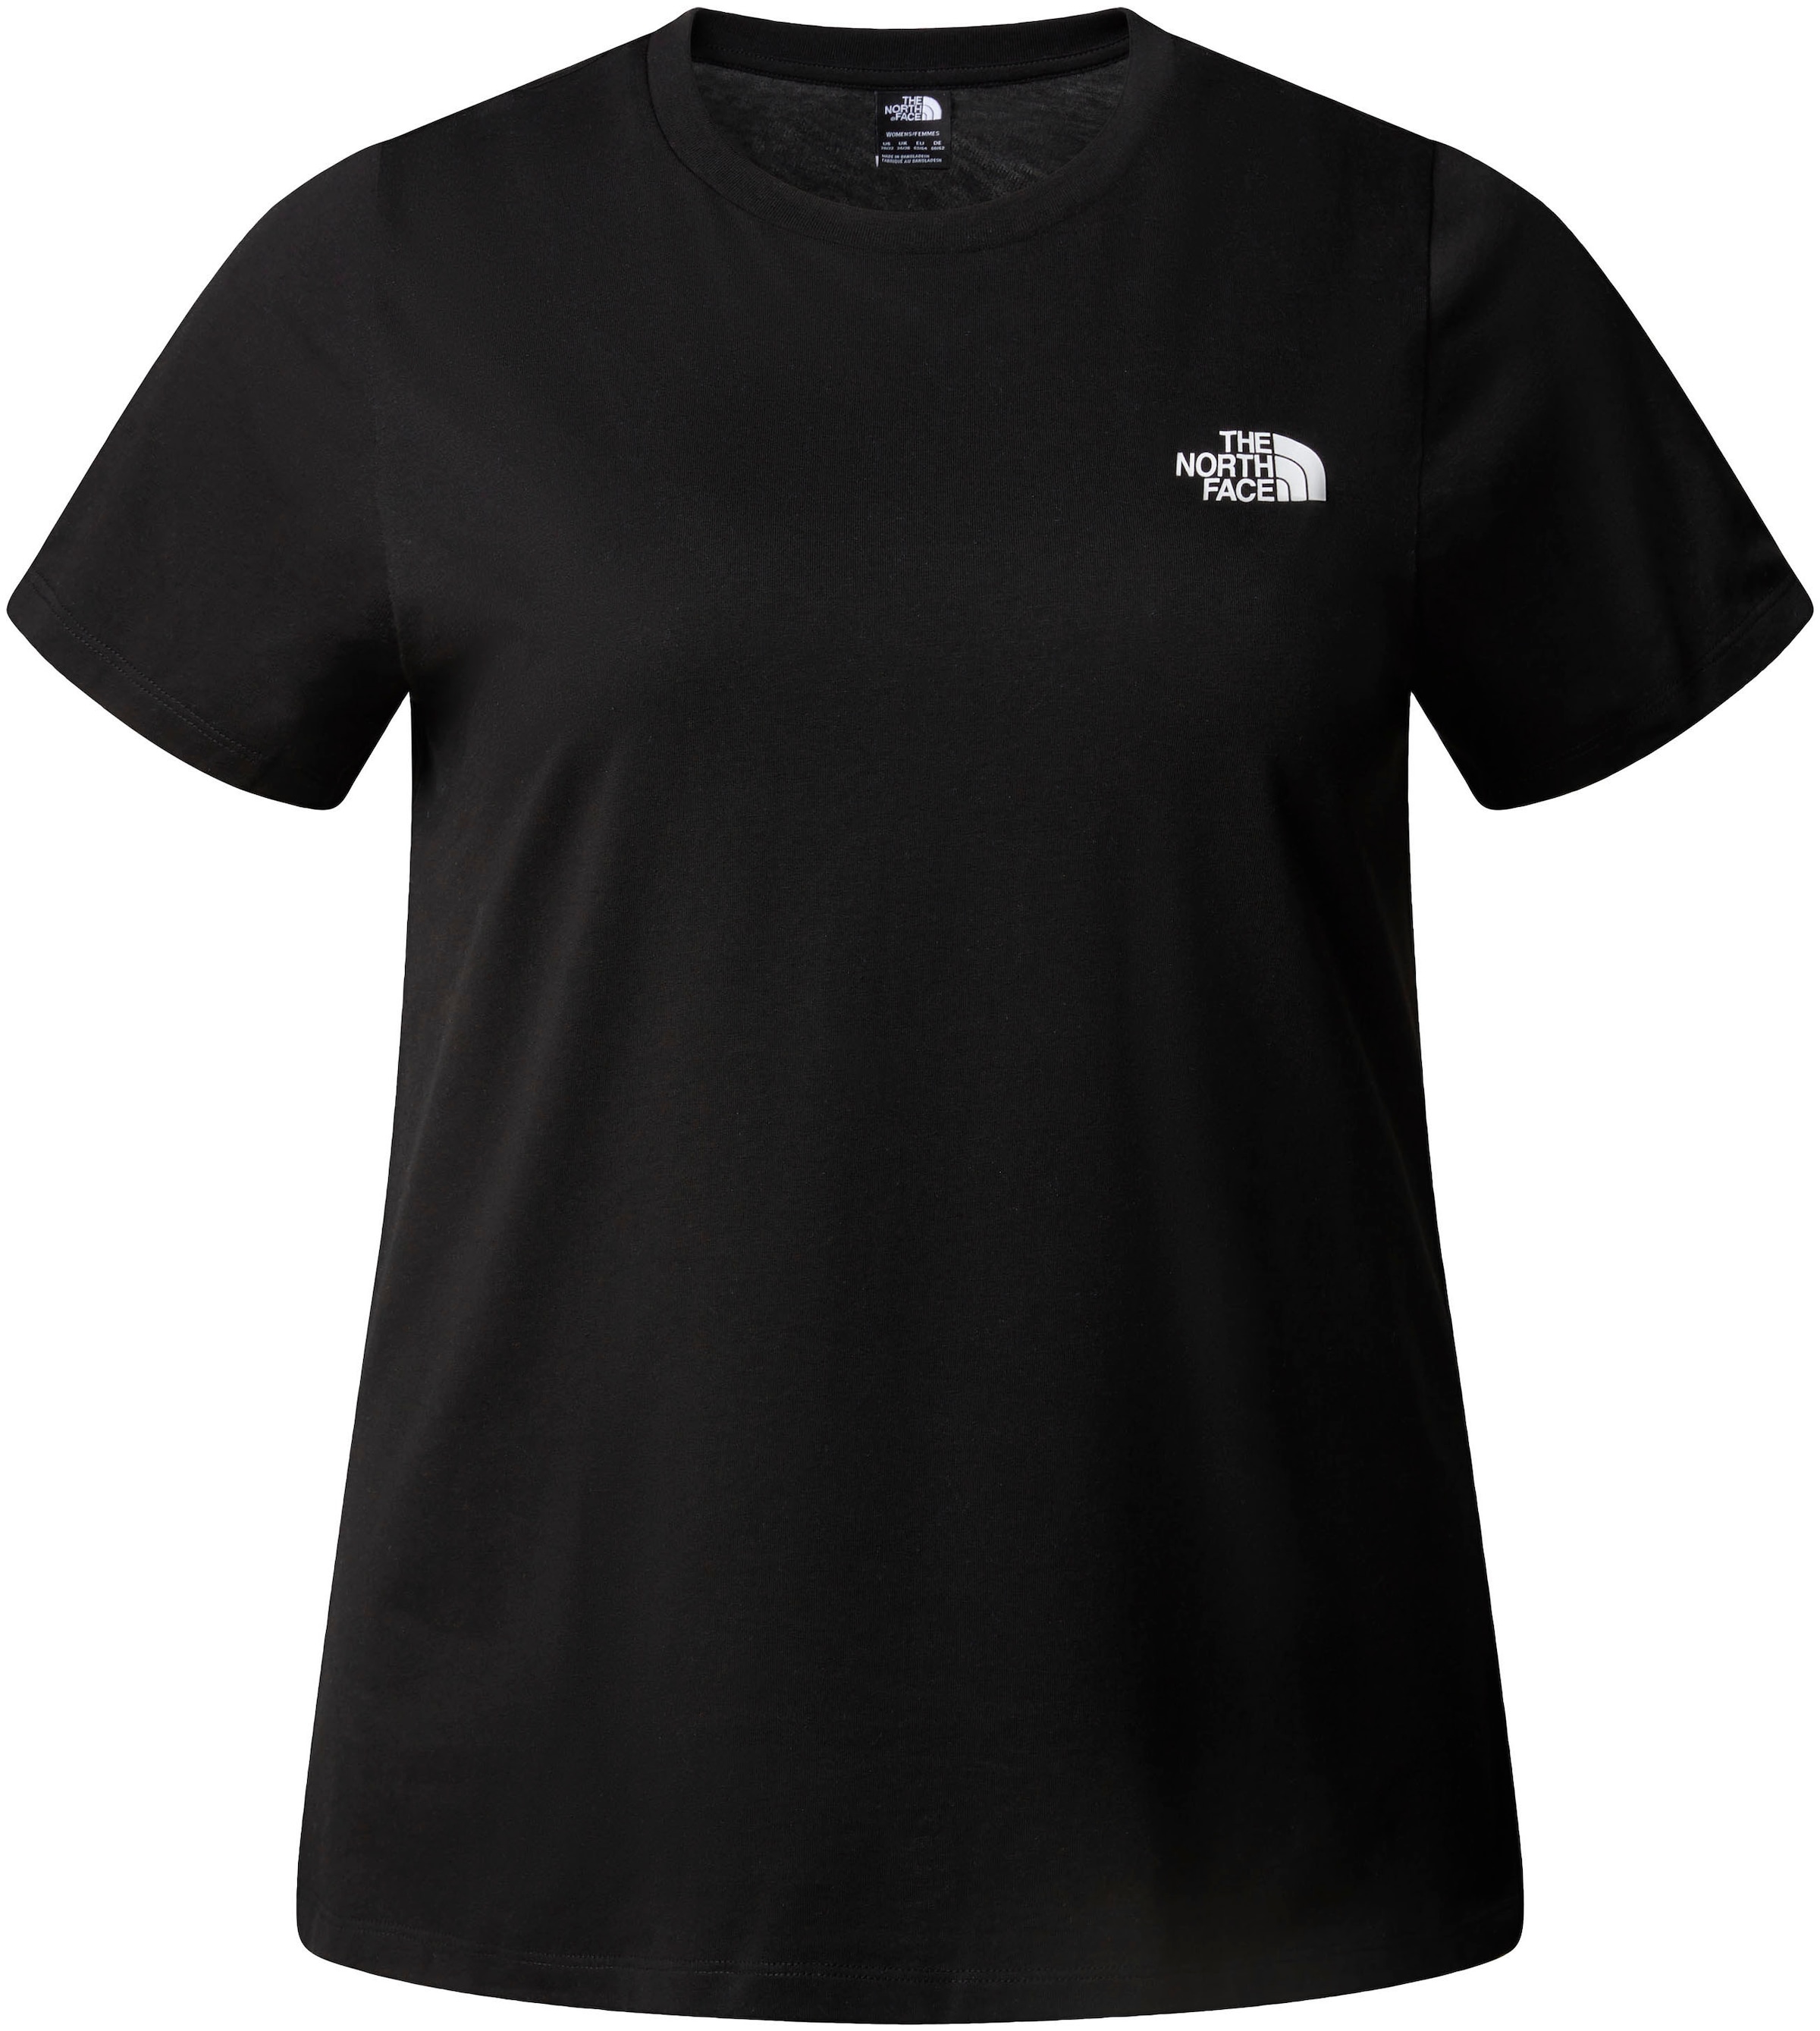 The North Face T-Shirt »W PLUS S/S SIMPLE DOME TEE«, in großen Größen